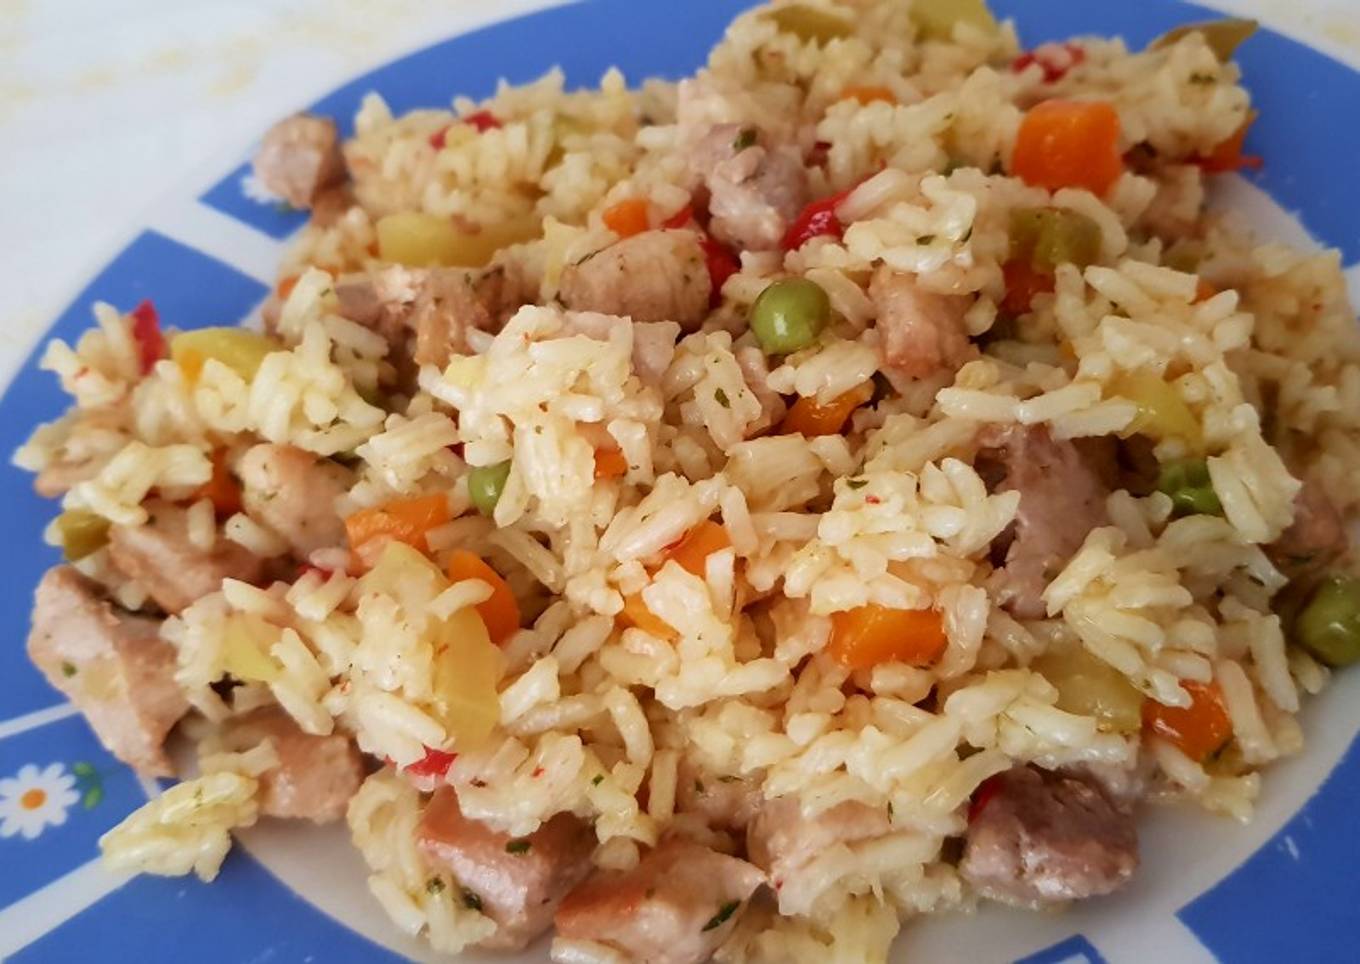 Salad with rice